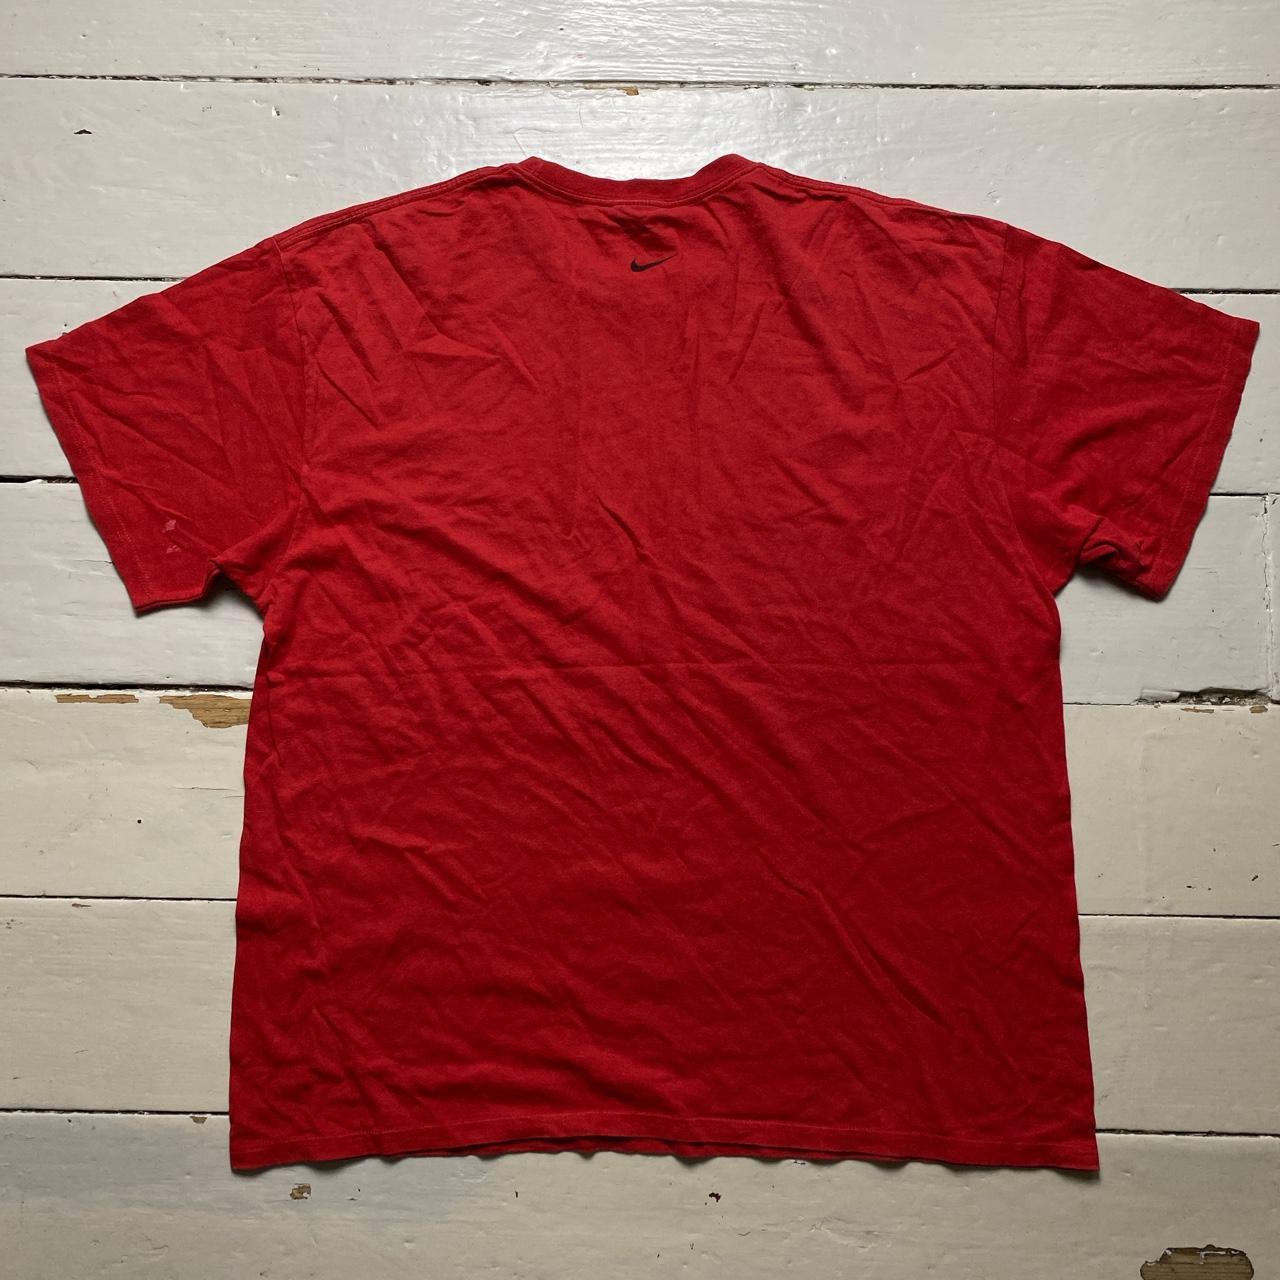 Nike Vintage Spellout T Shirt Red